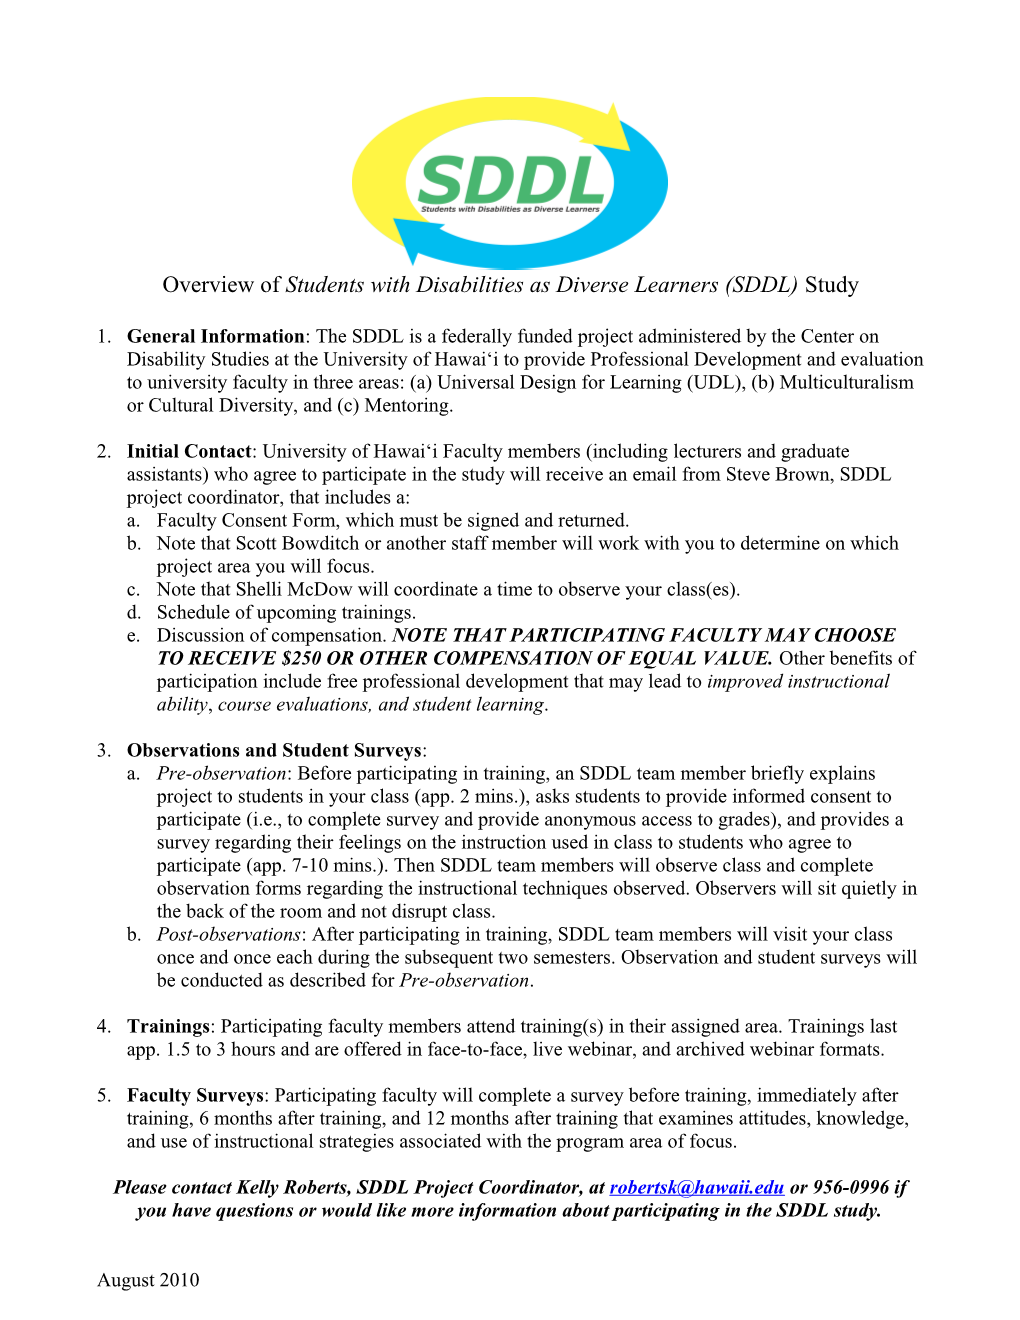 Overview of Students with Disabilities As Diverse Learners (SDDL) Study